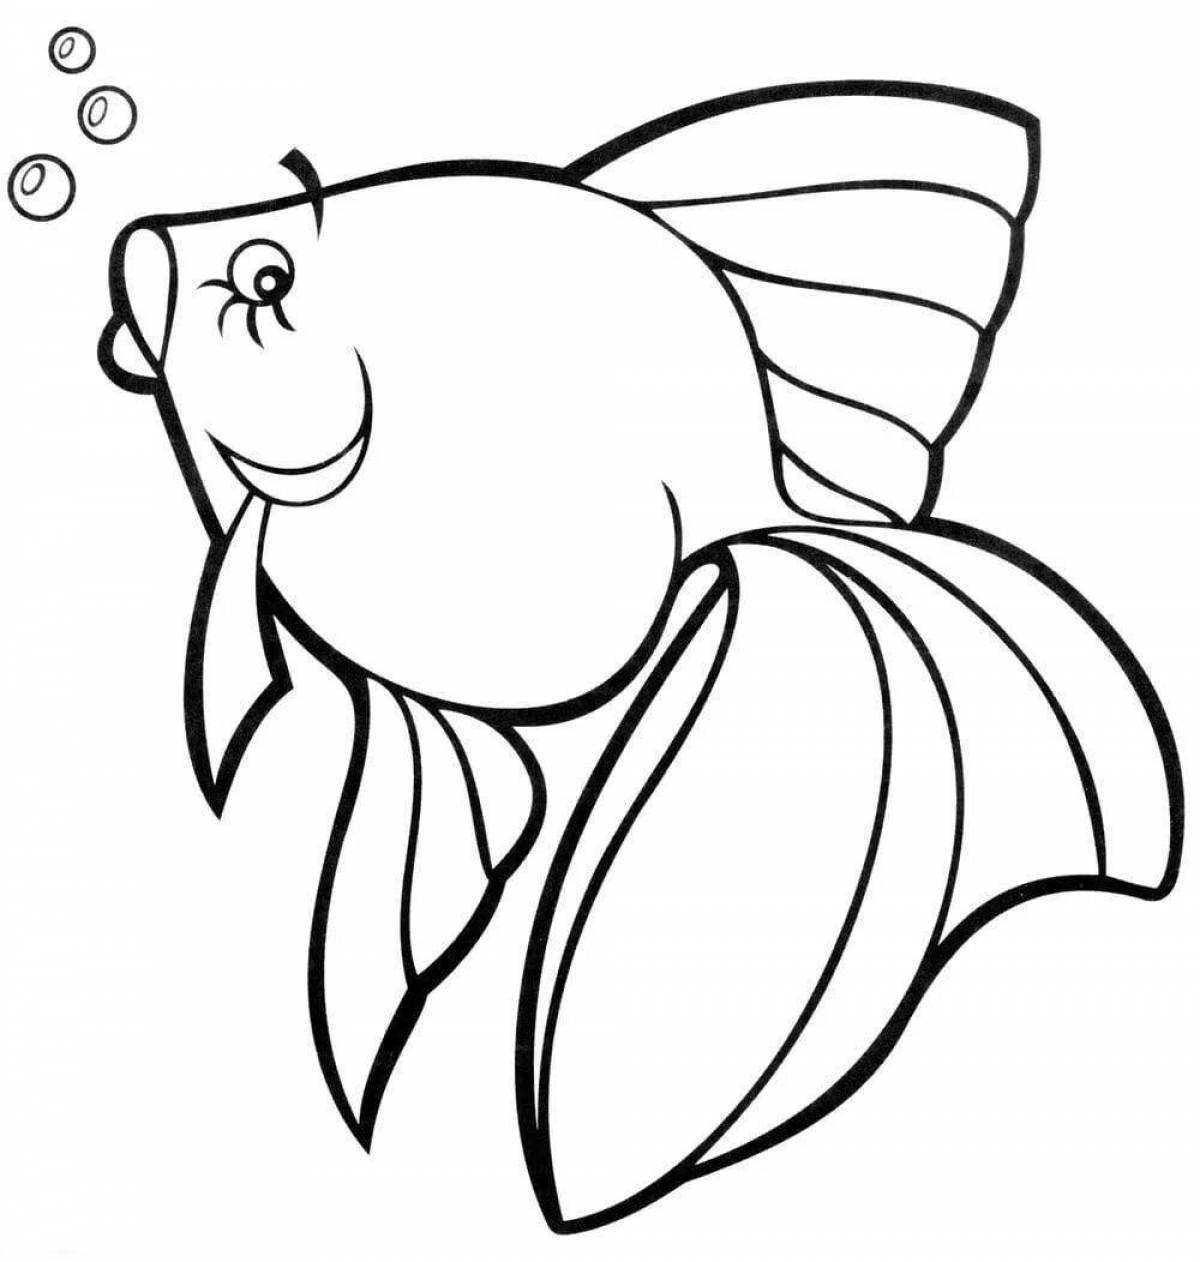 Flawless goldfish coloring for kids